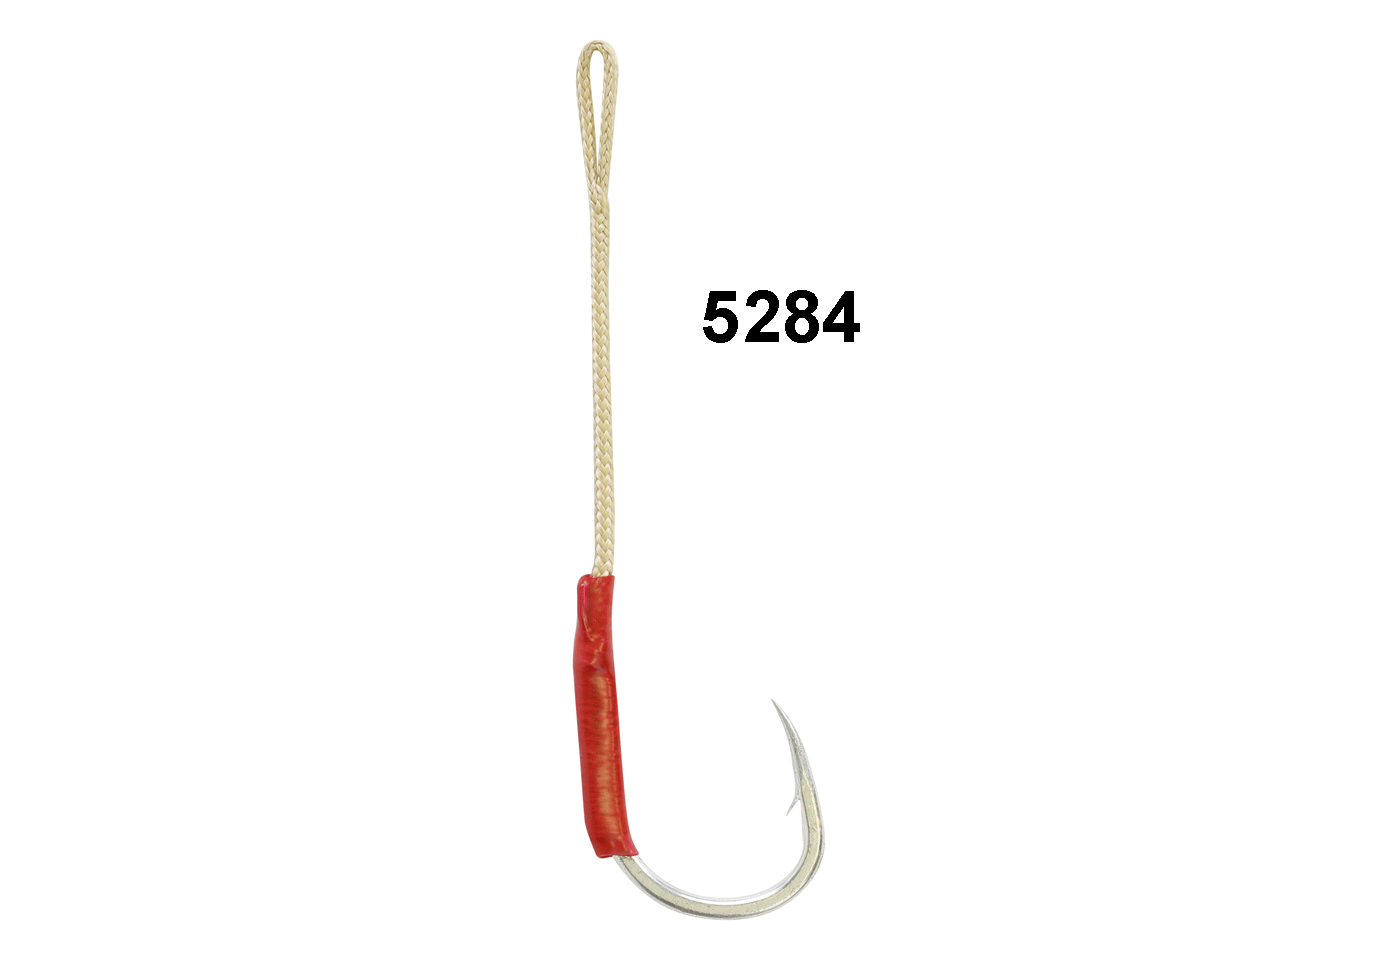 Owner Red Super Needle Point Hook Size 7/0 - For Baiting Up Nightcrawlers